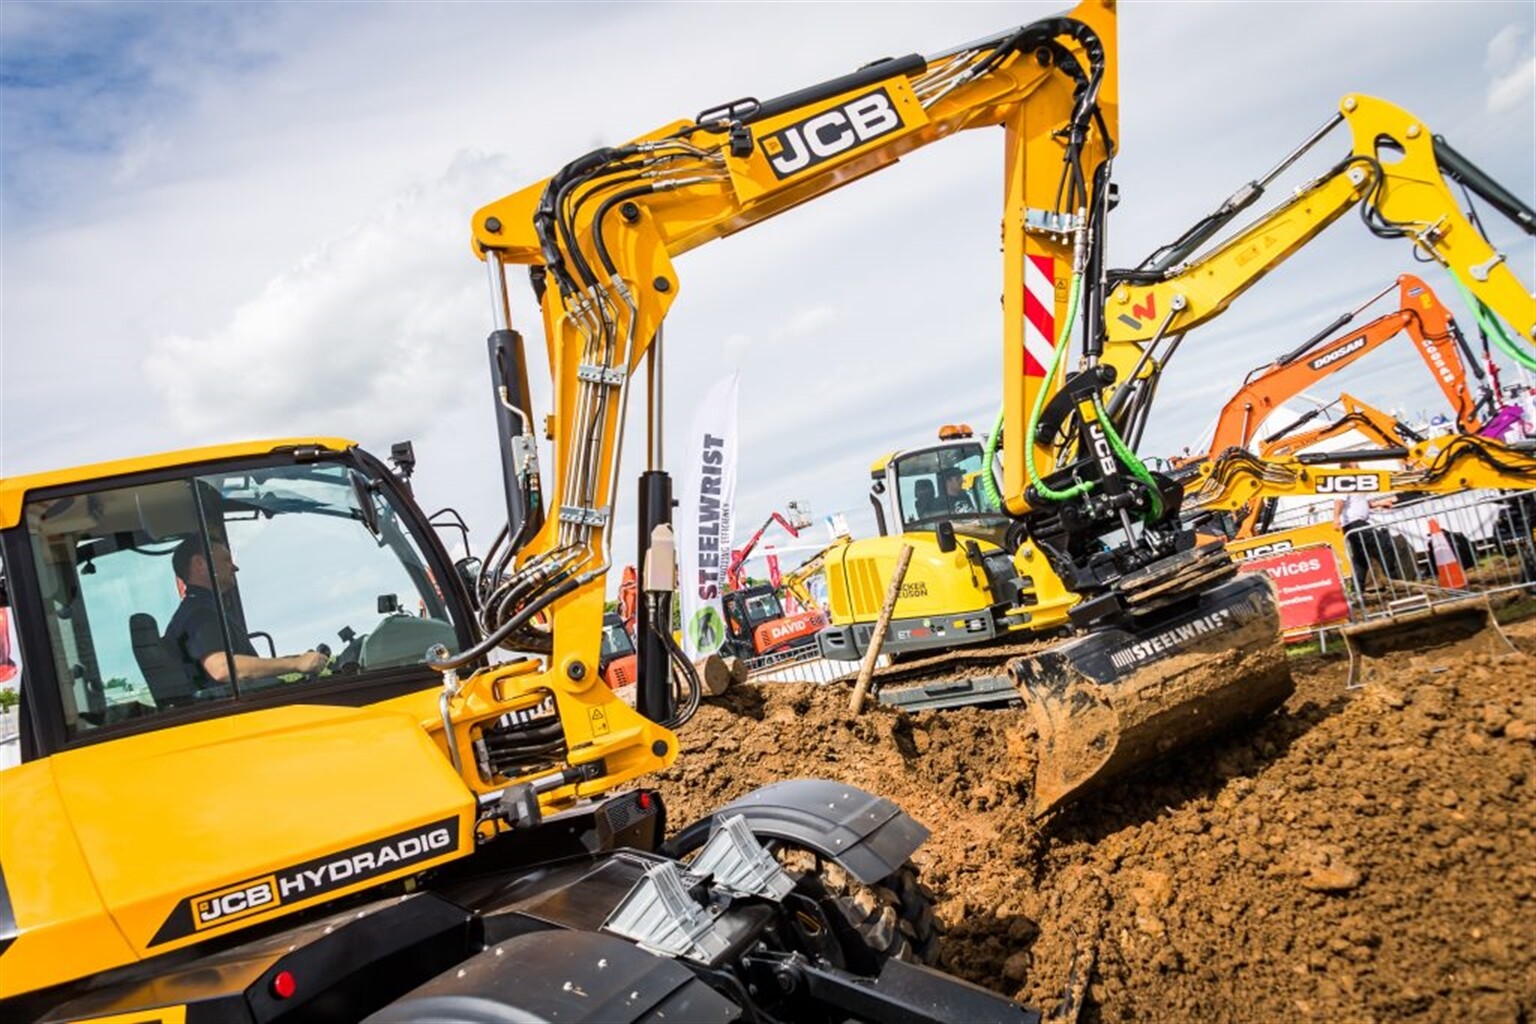 Only three digging demo plots remain at Plantworx...